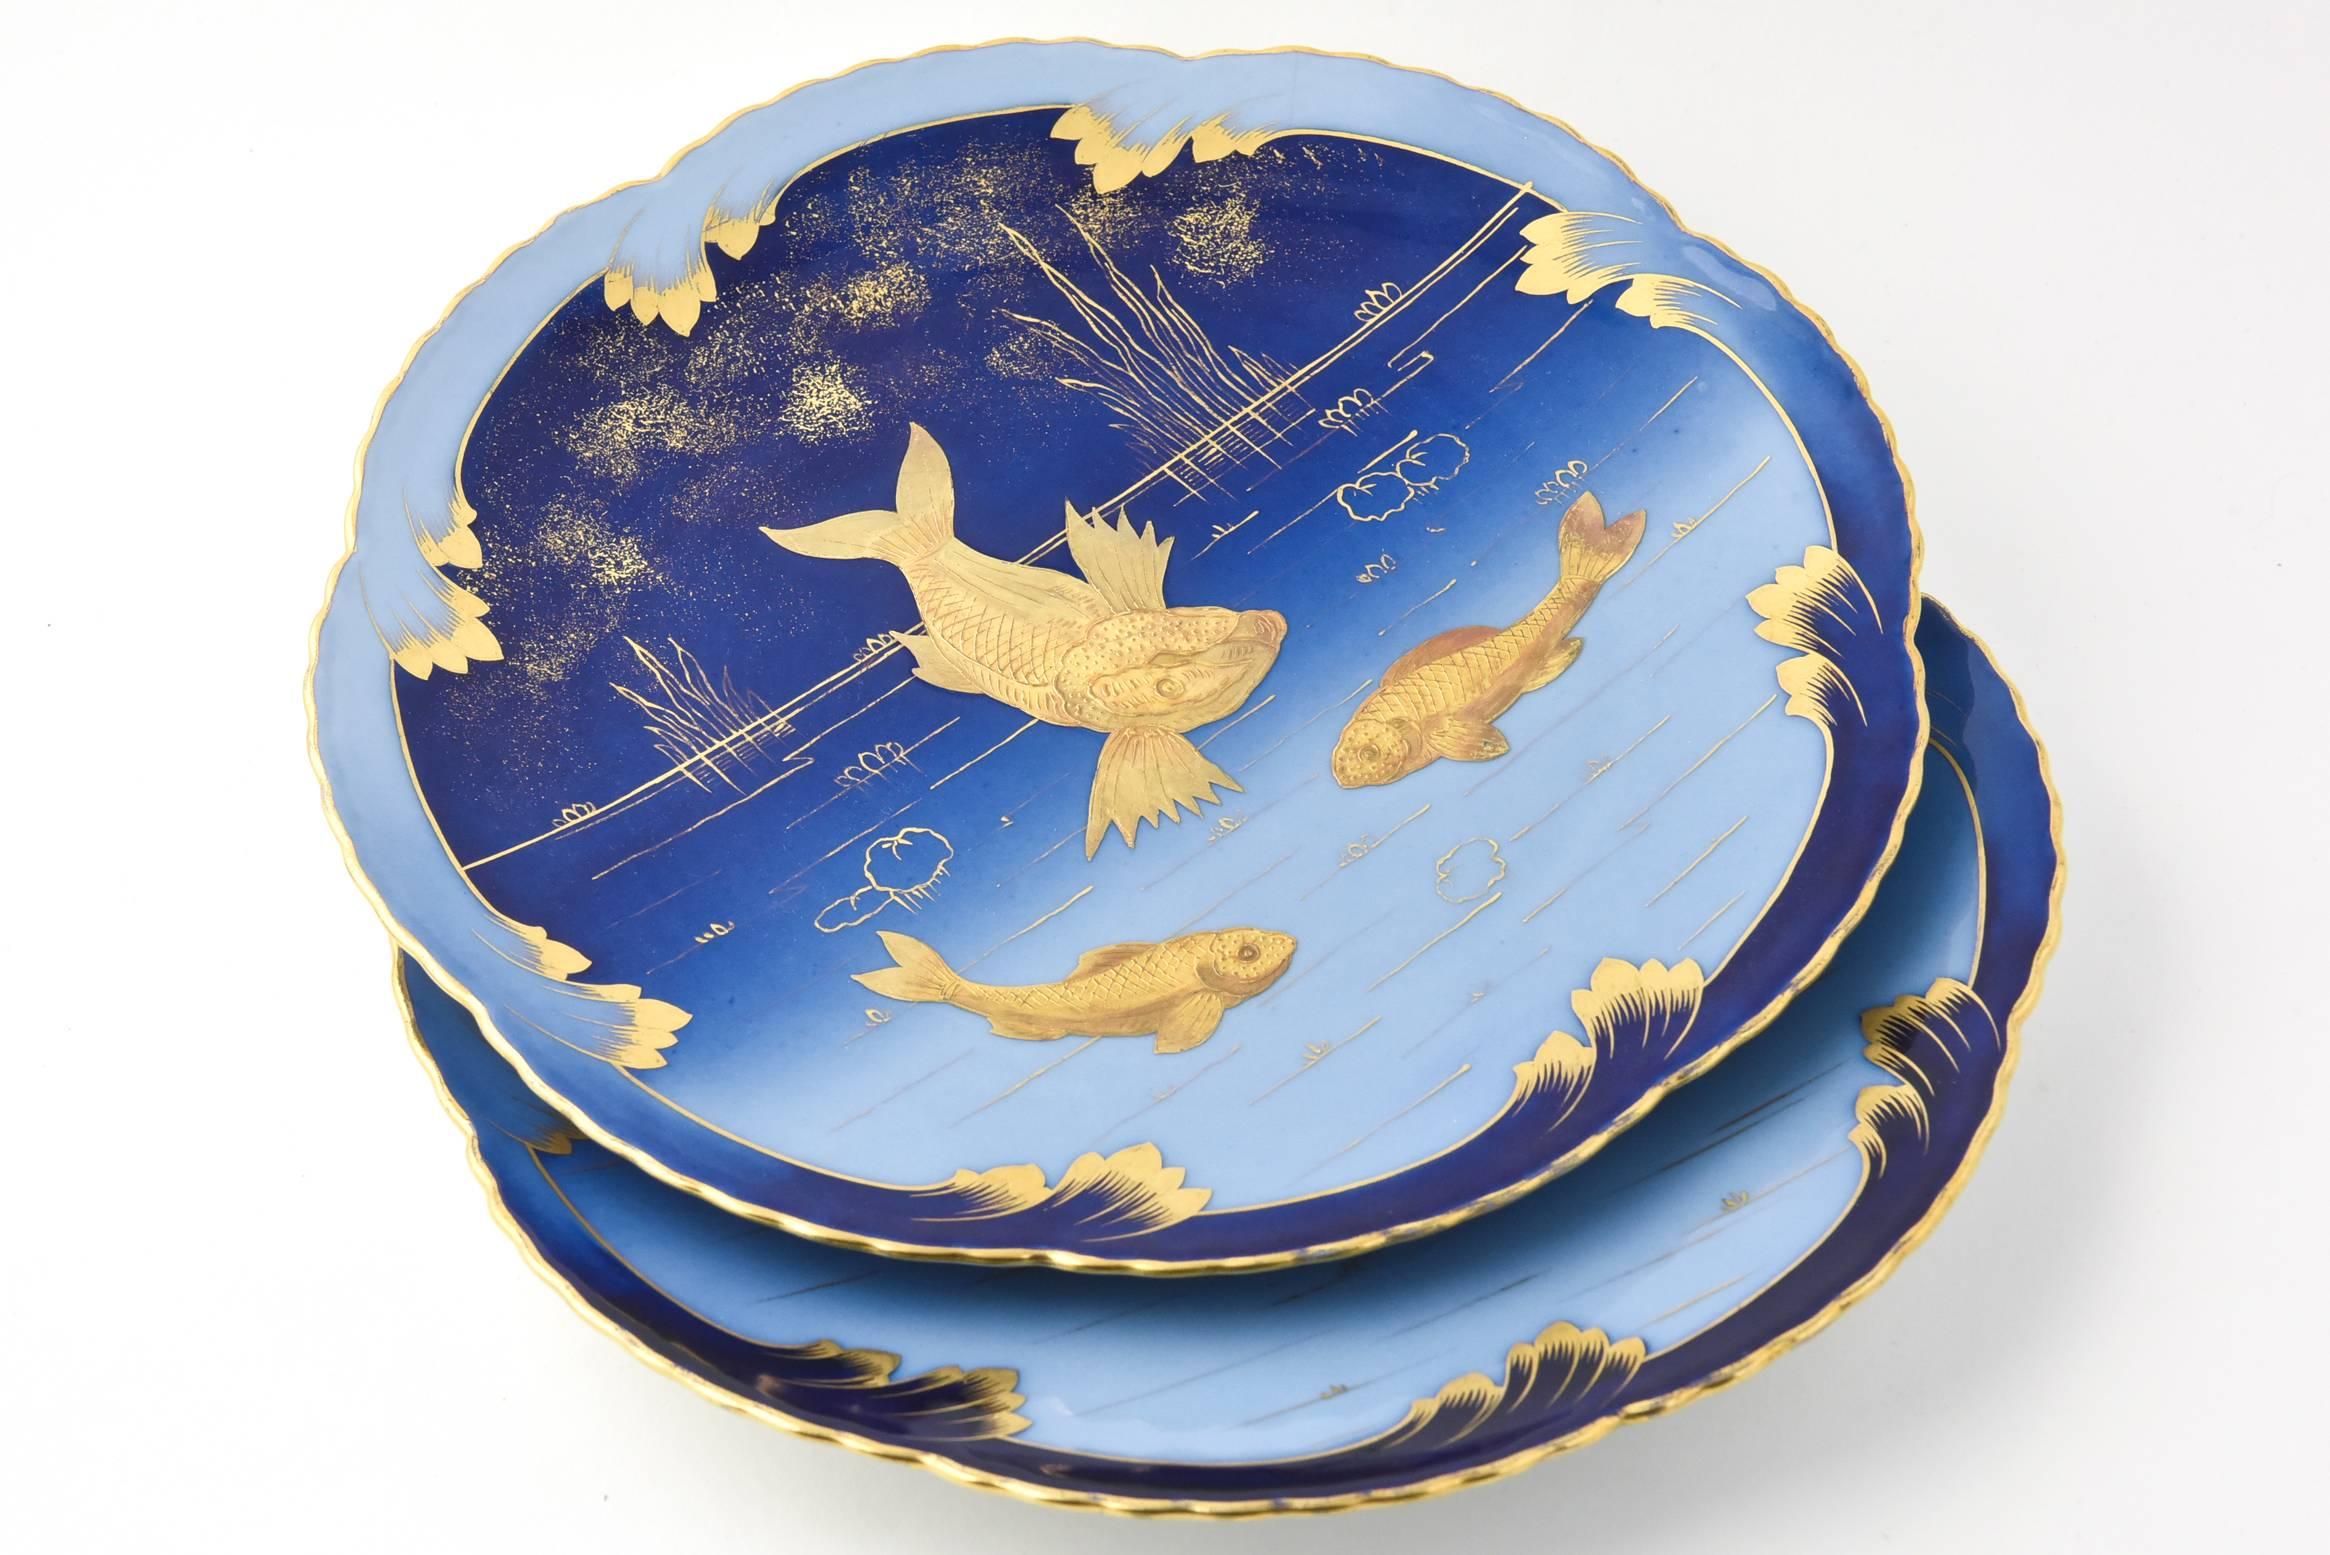 Fired Pair of 19th Century Porcelain Gold and Blue Fish Plates By Pirkenhammer